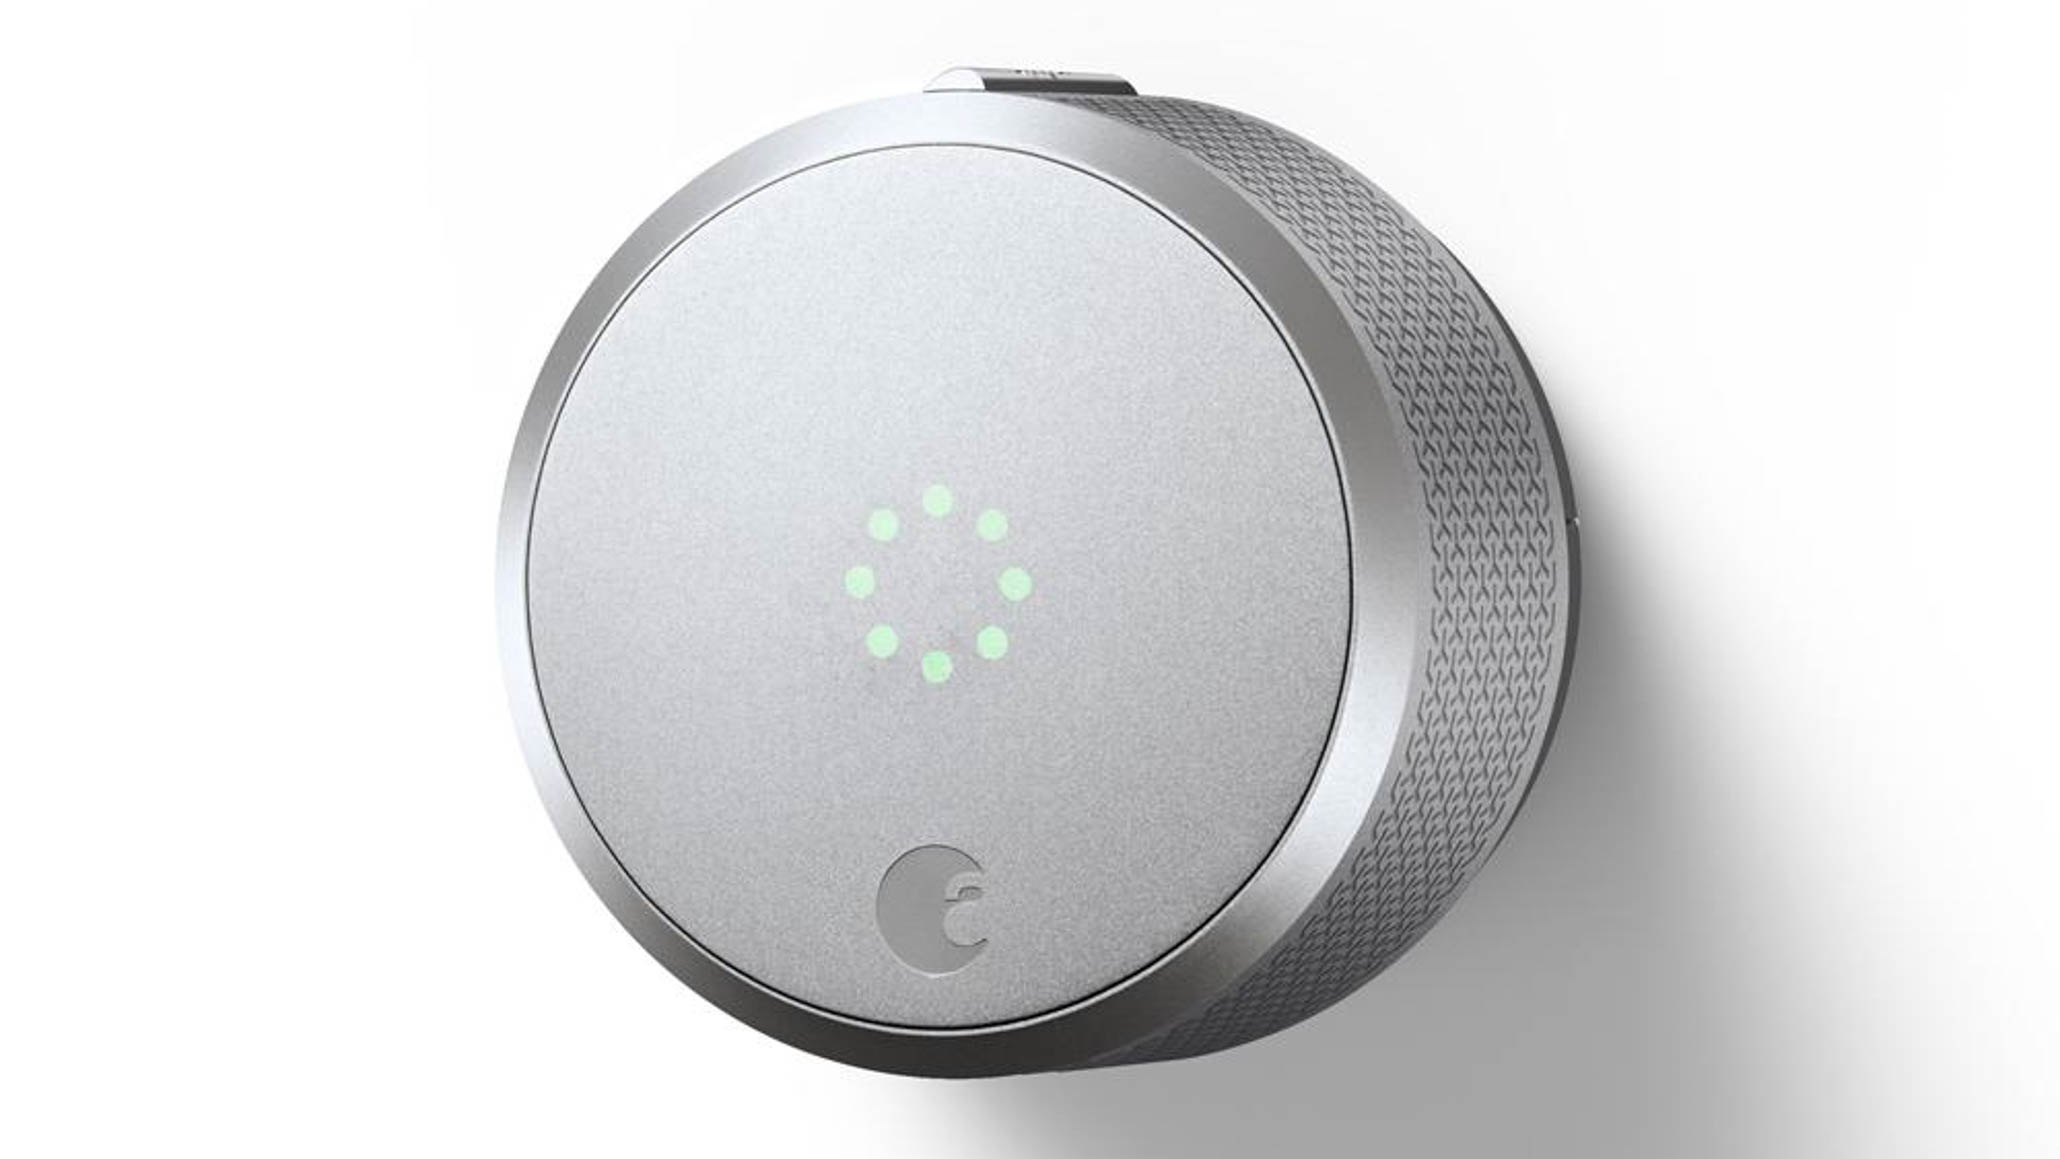 August Smart Lock Pro. Image: August Home.